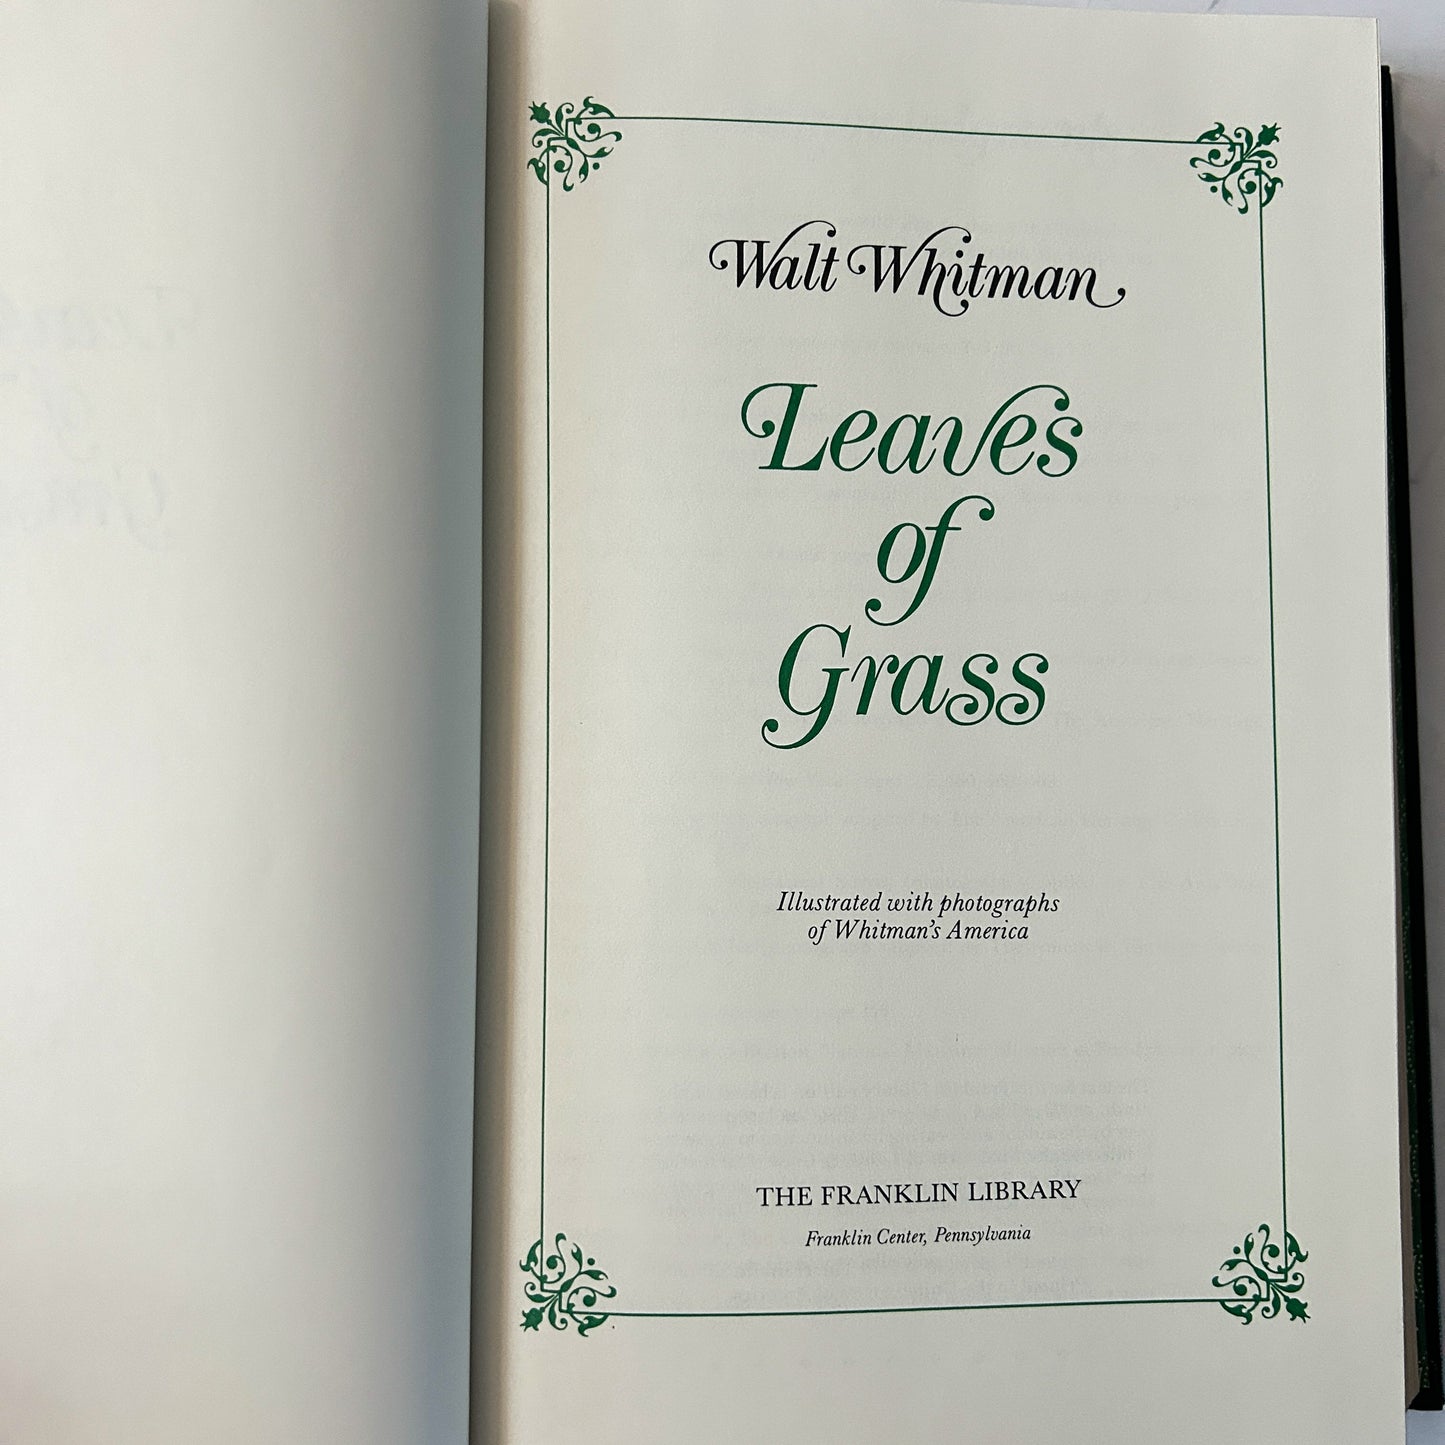 Leaves of Grass by Walt Whitman, vintage Franklin Library edition